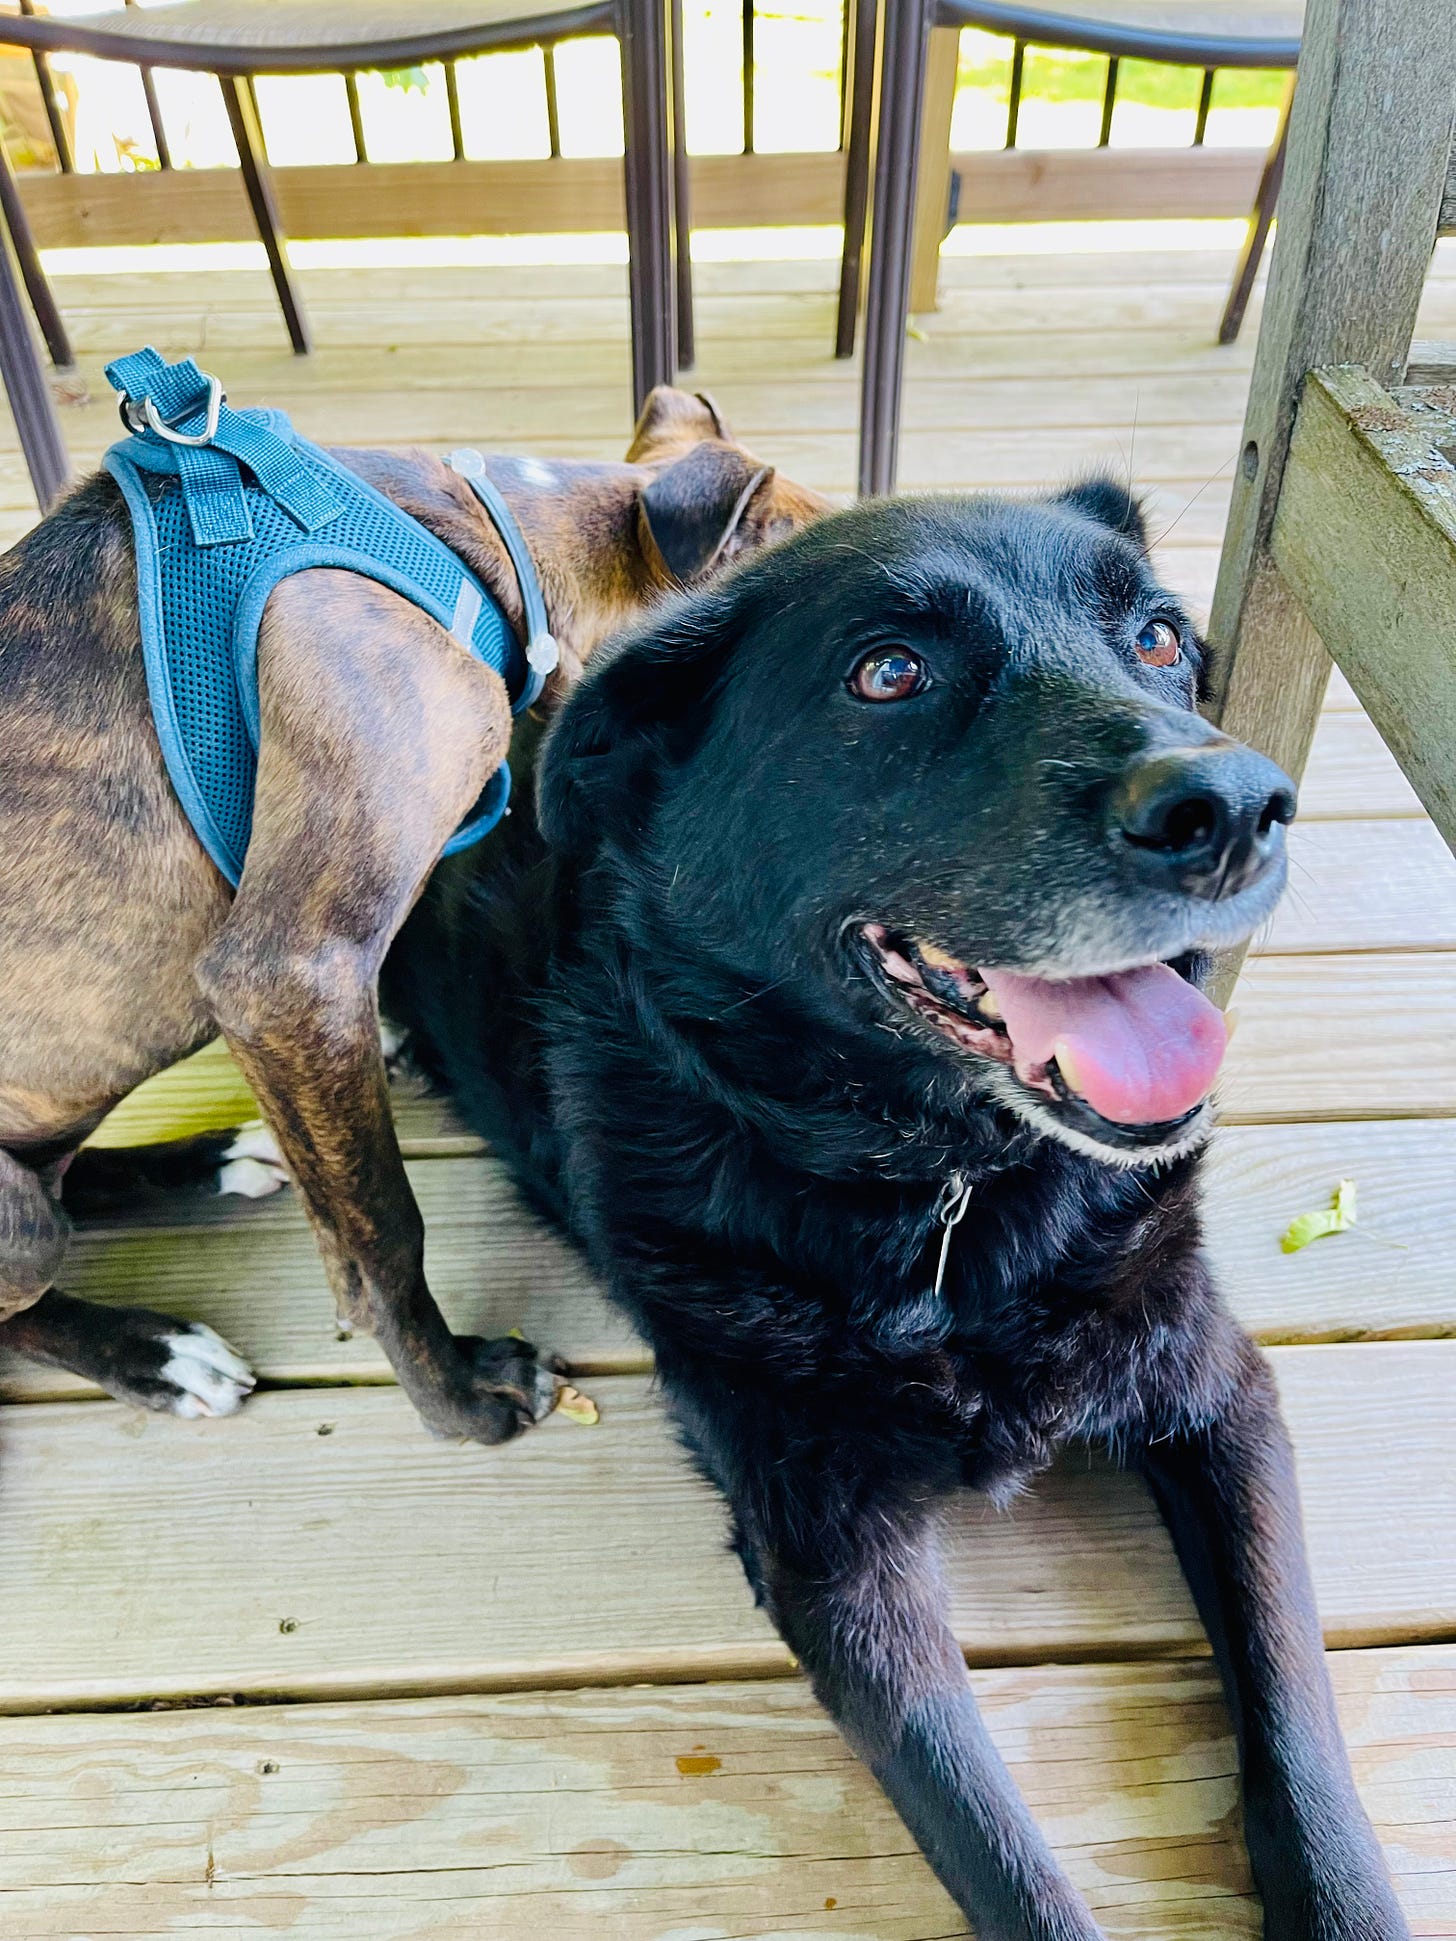 Two dogs on a deck. One dog is sideways with her head resting on the front-facing larger dog's back